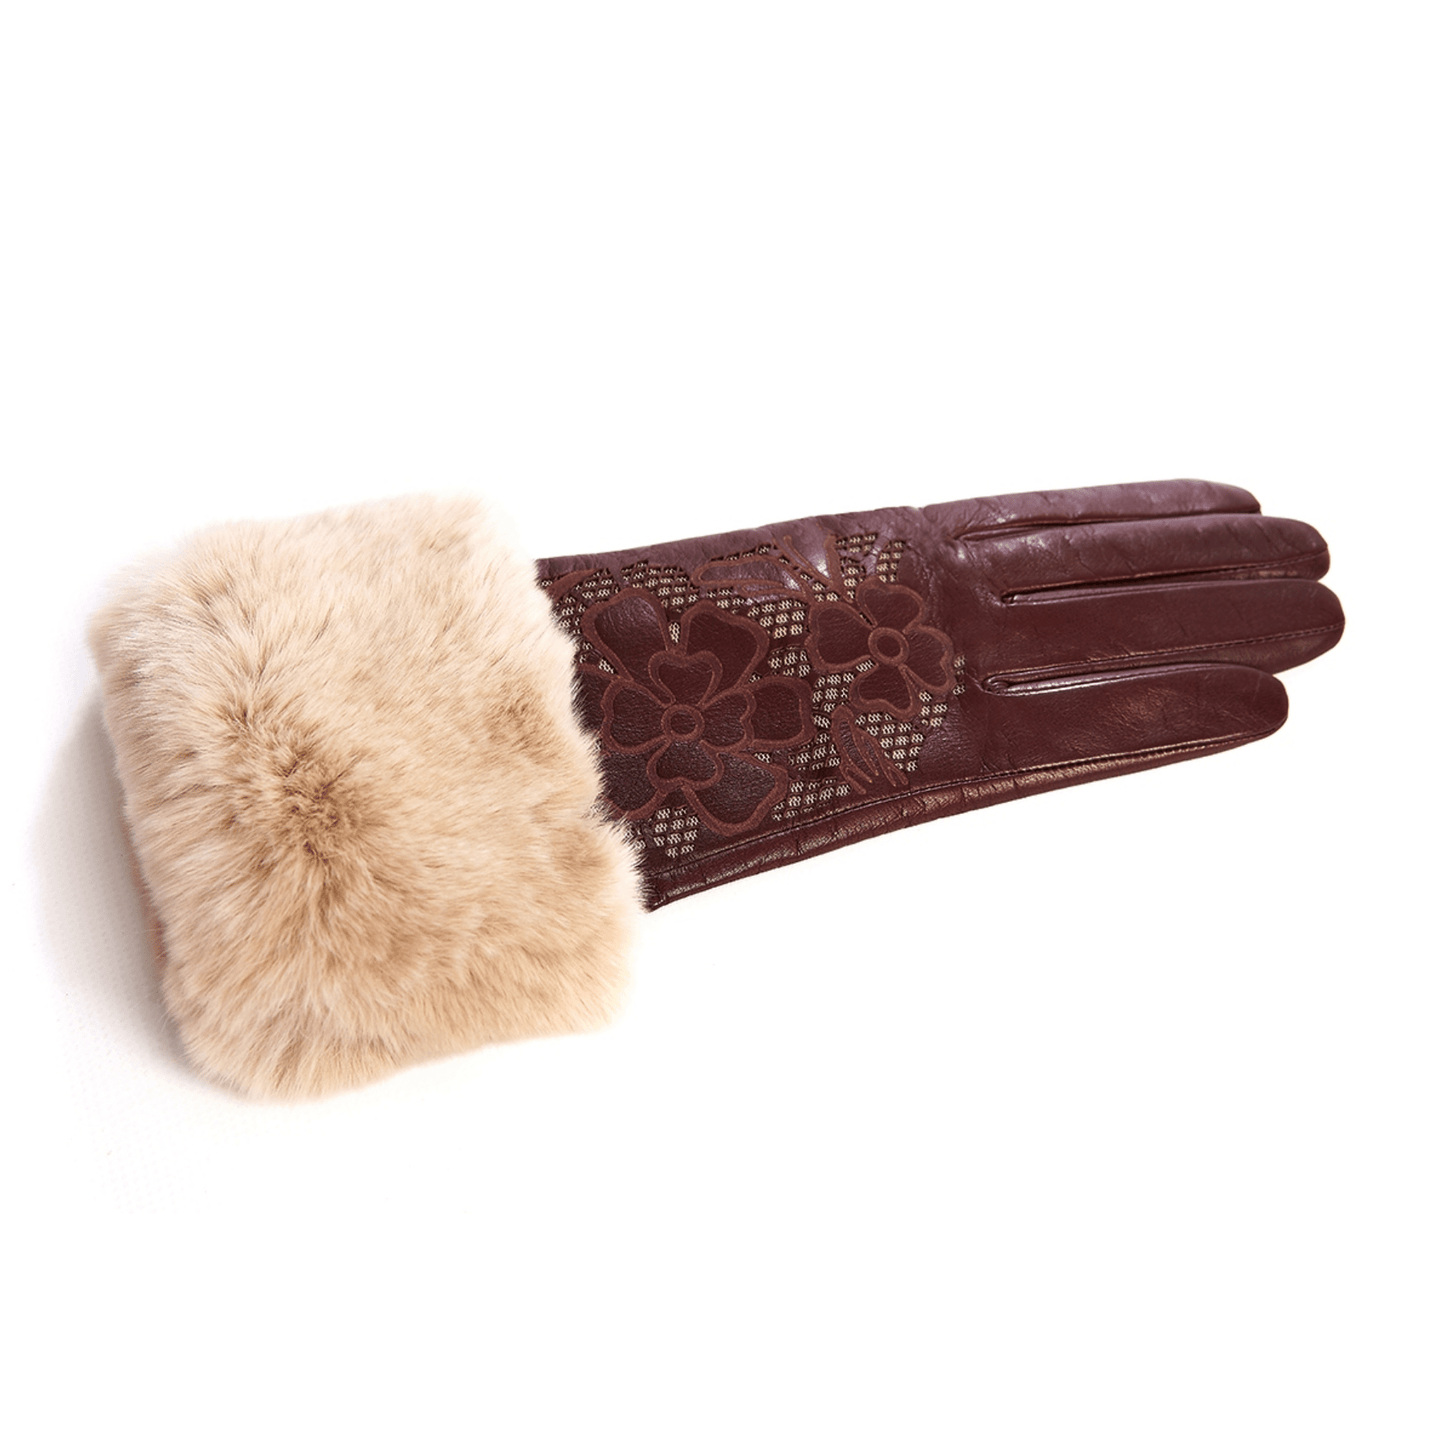 Women's cashmere lined bordeaux sheepleather gloves with flower laser cut details on top and real fur cuff